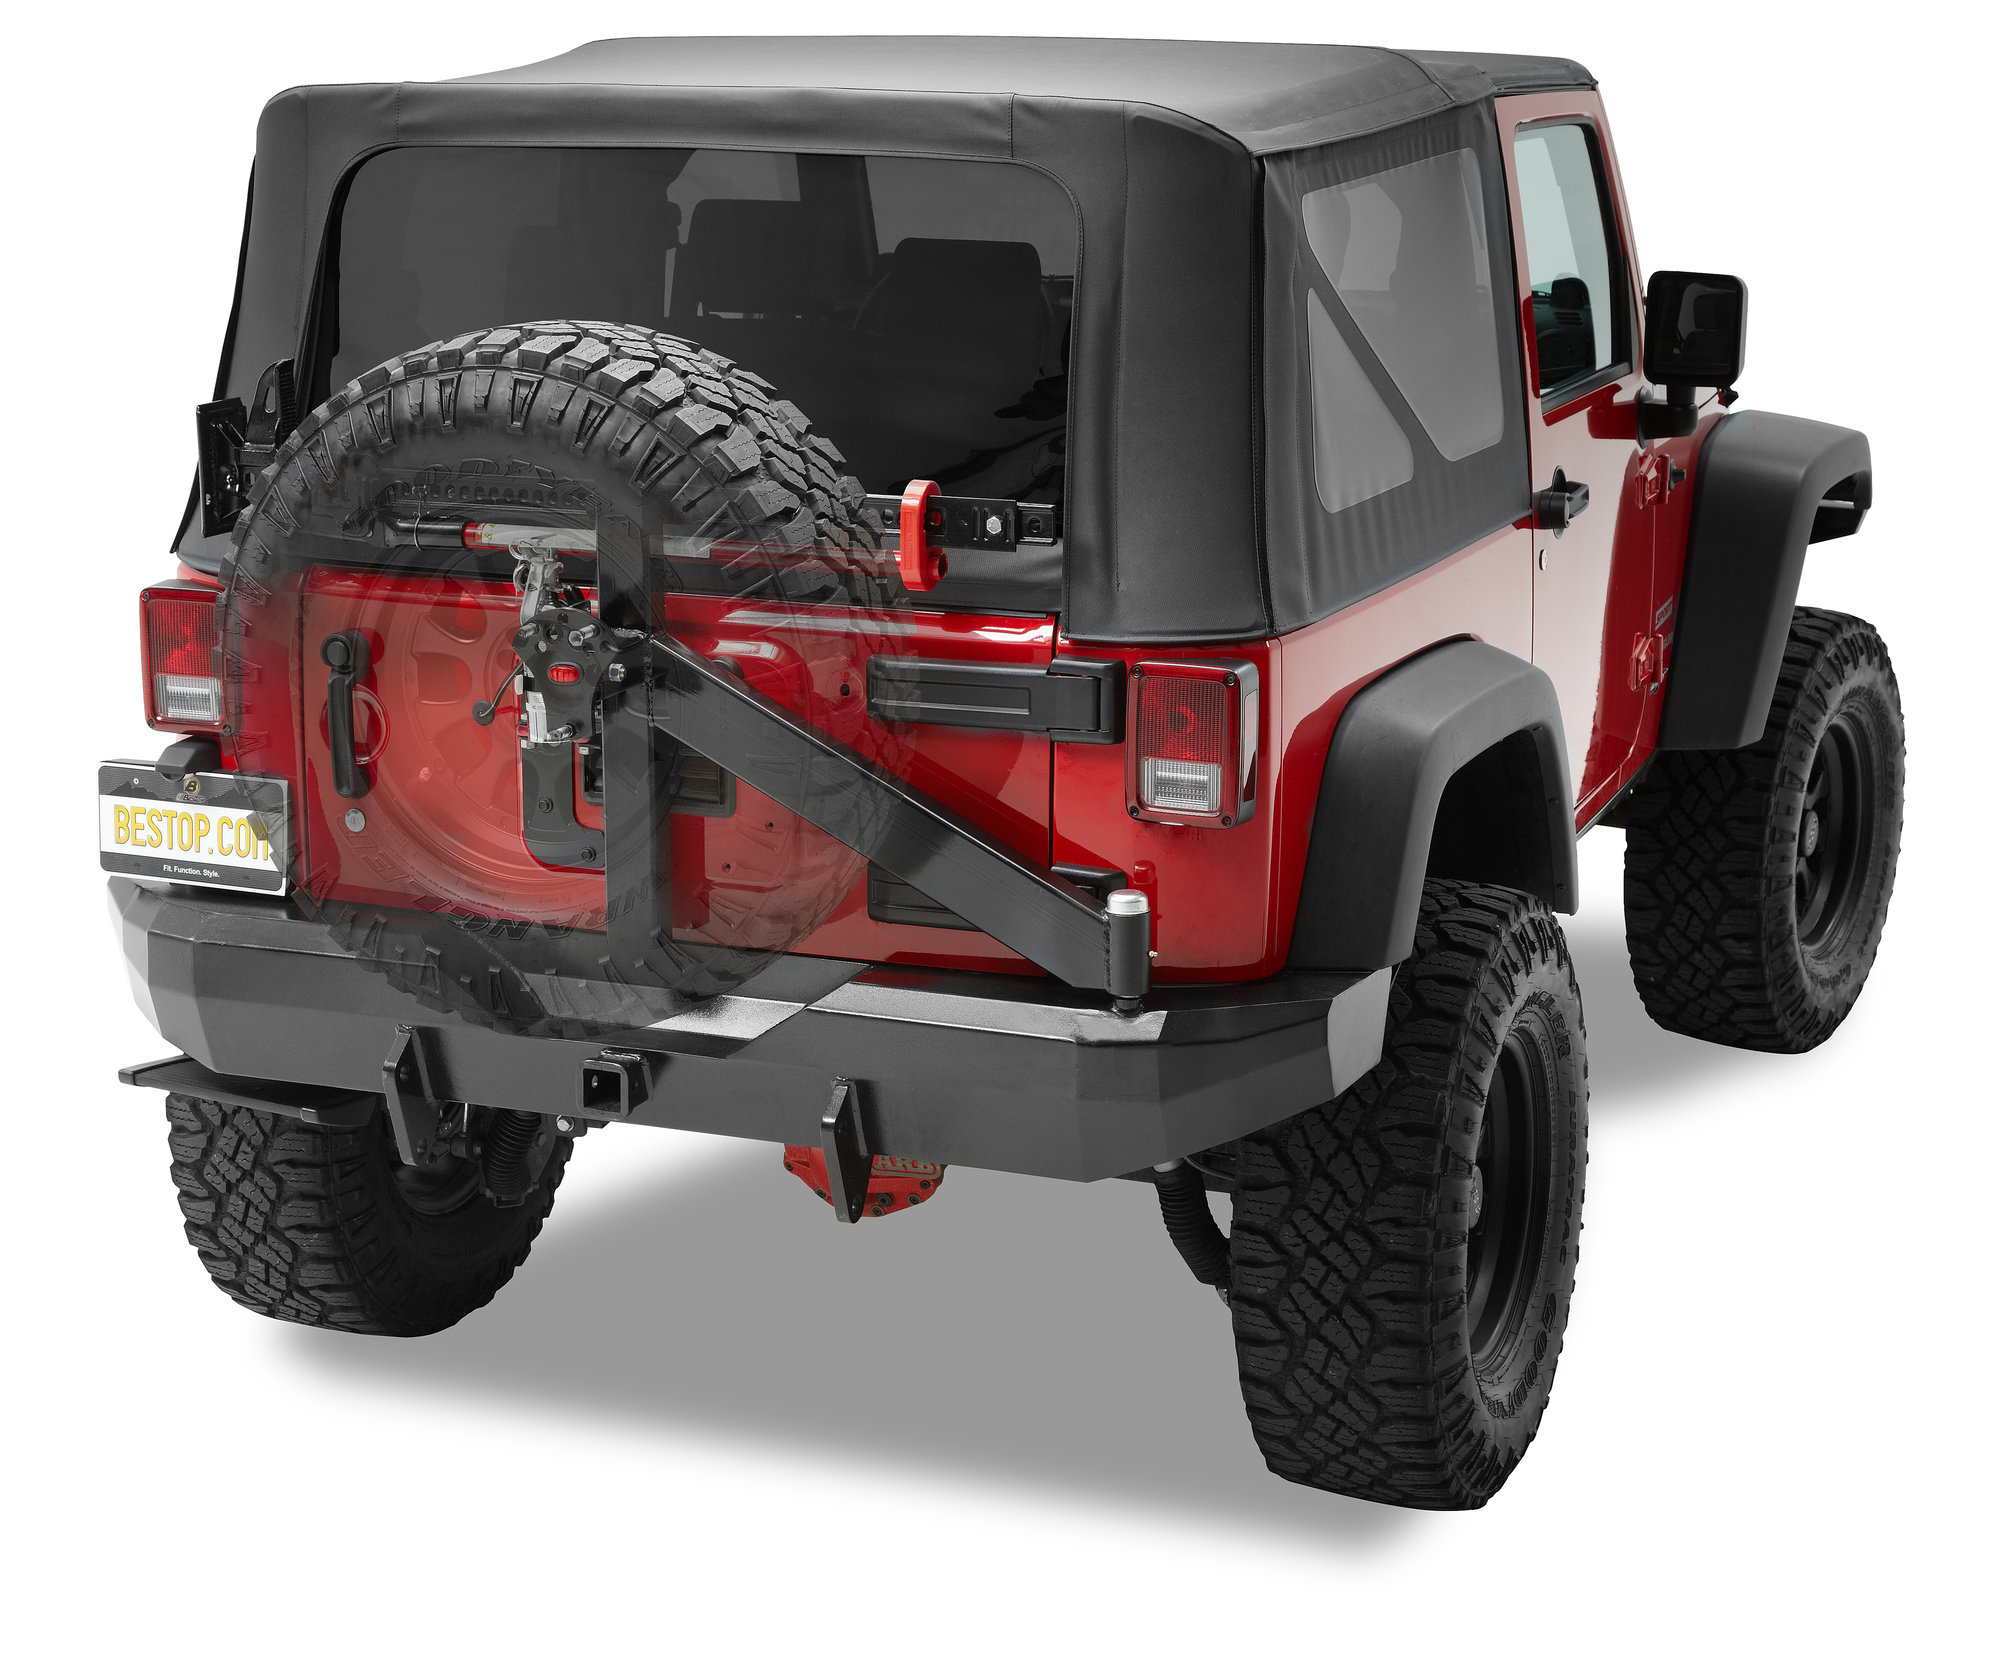 Bestop HighRock 4x4 Rear Bumper with Tire Carrier for 07-18 Jeep Wrangler &  Wrangler Unlimited | Quadratec